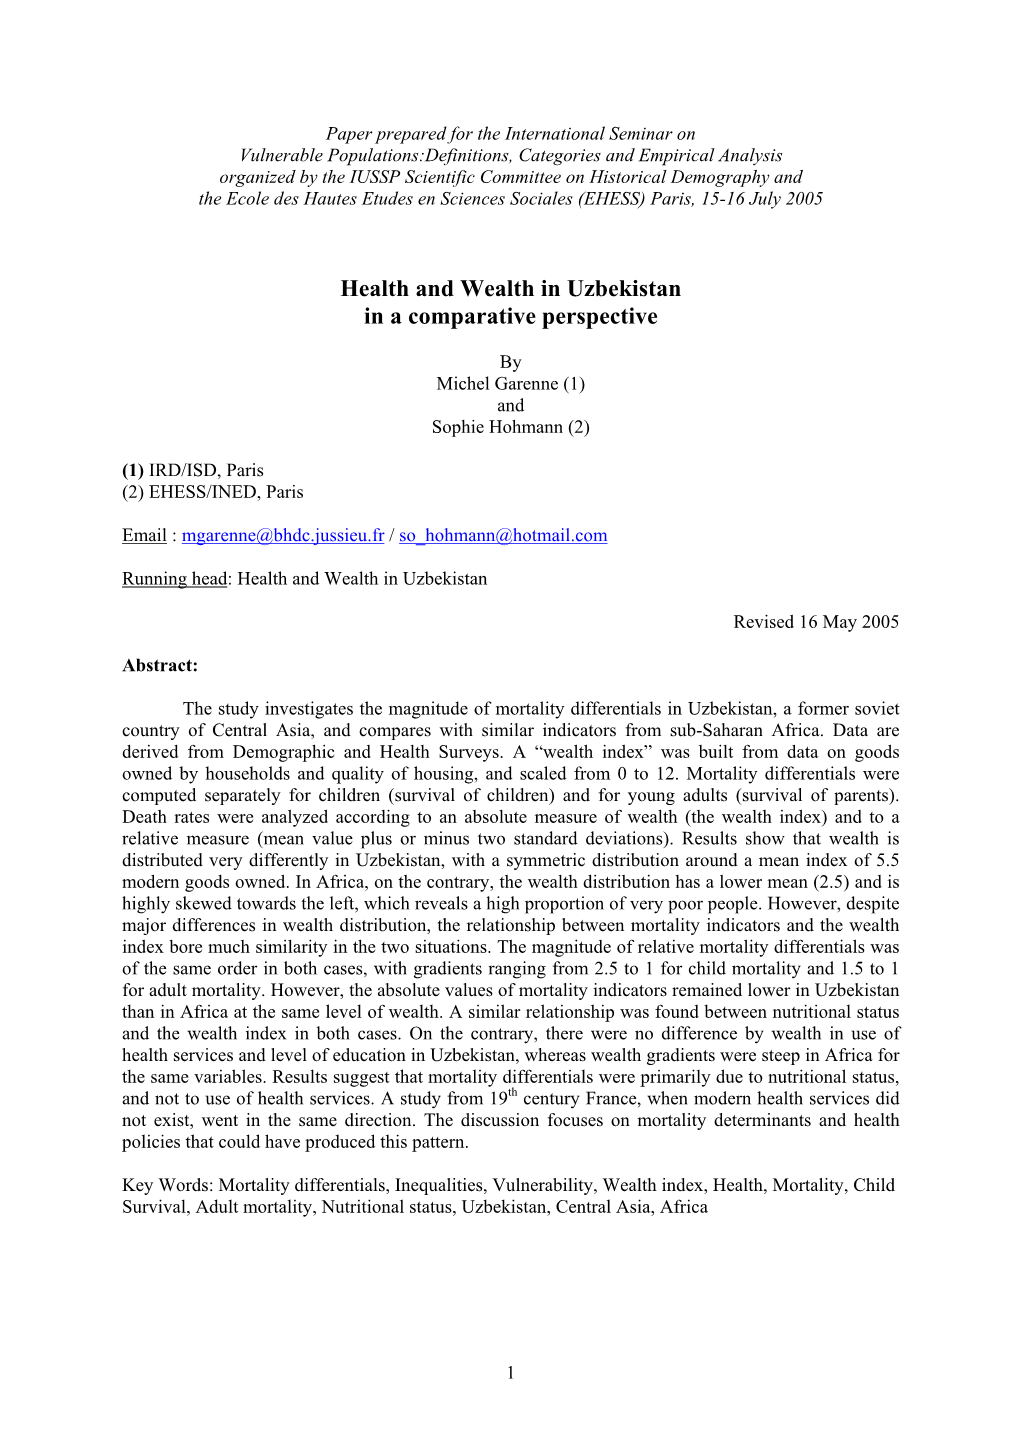 Health and Wealth in Uzbekistan in a Comparative Perspective